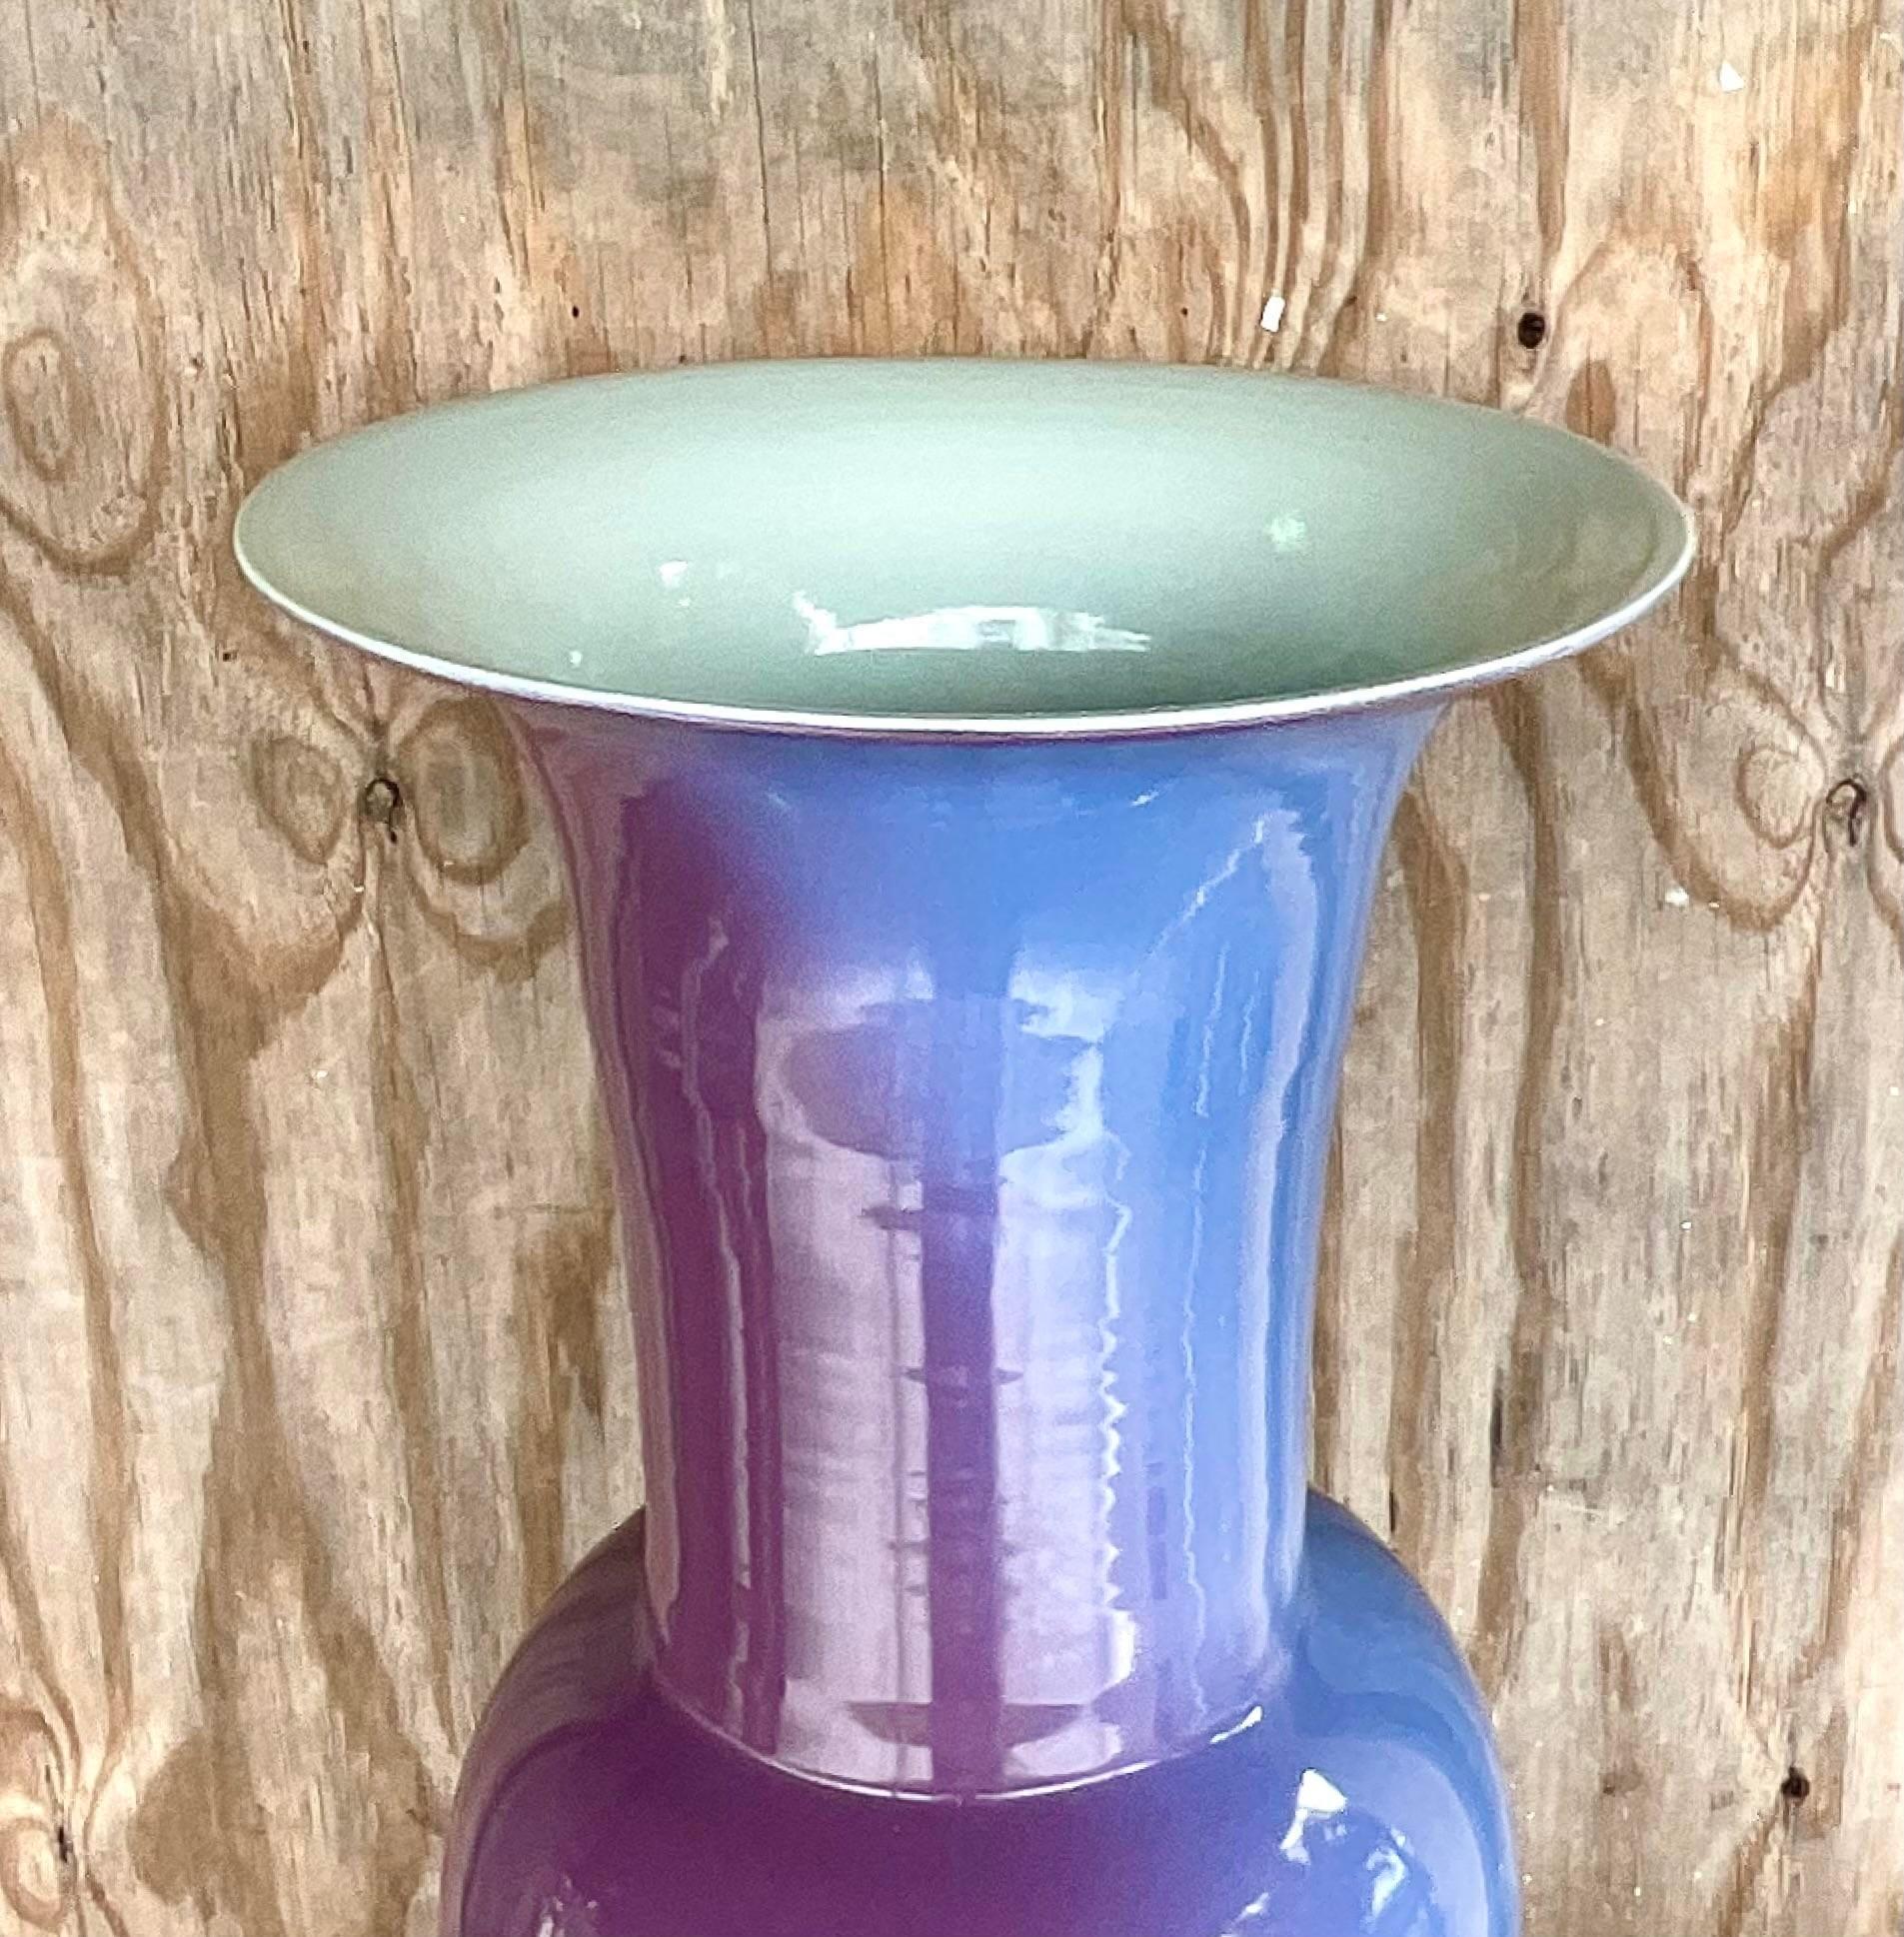 Fantastic vintage glazed ceramic vase. Beautiful ombré design in a high glass finish. Acquired from a Palm Beach estate.